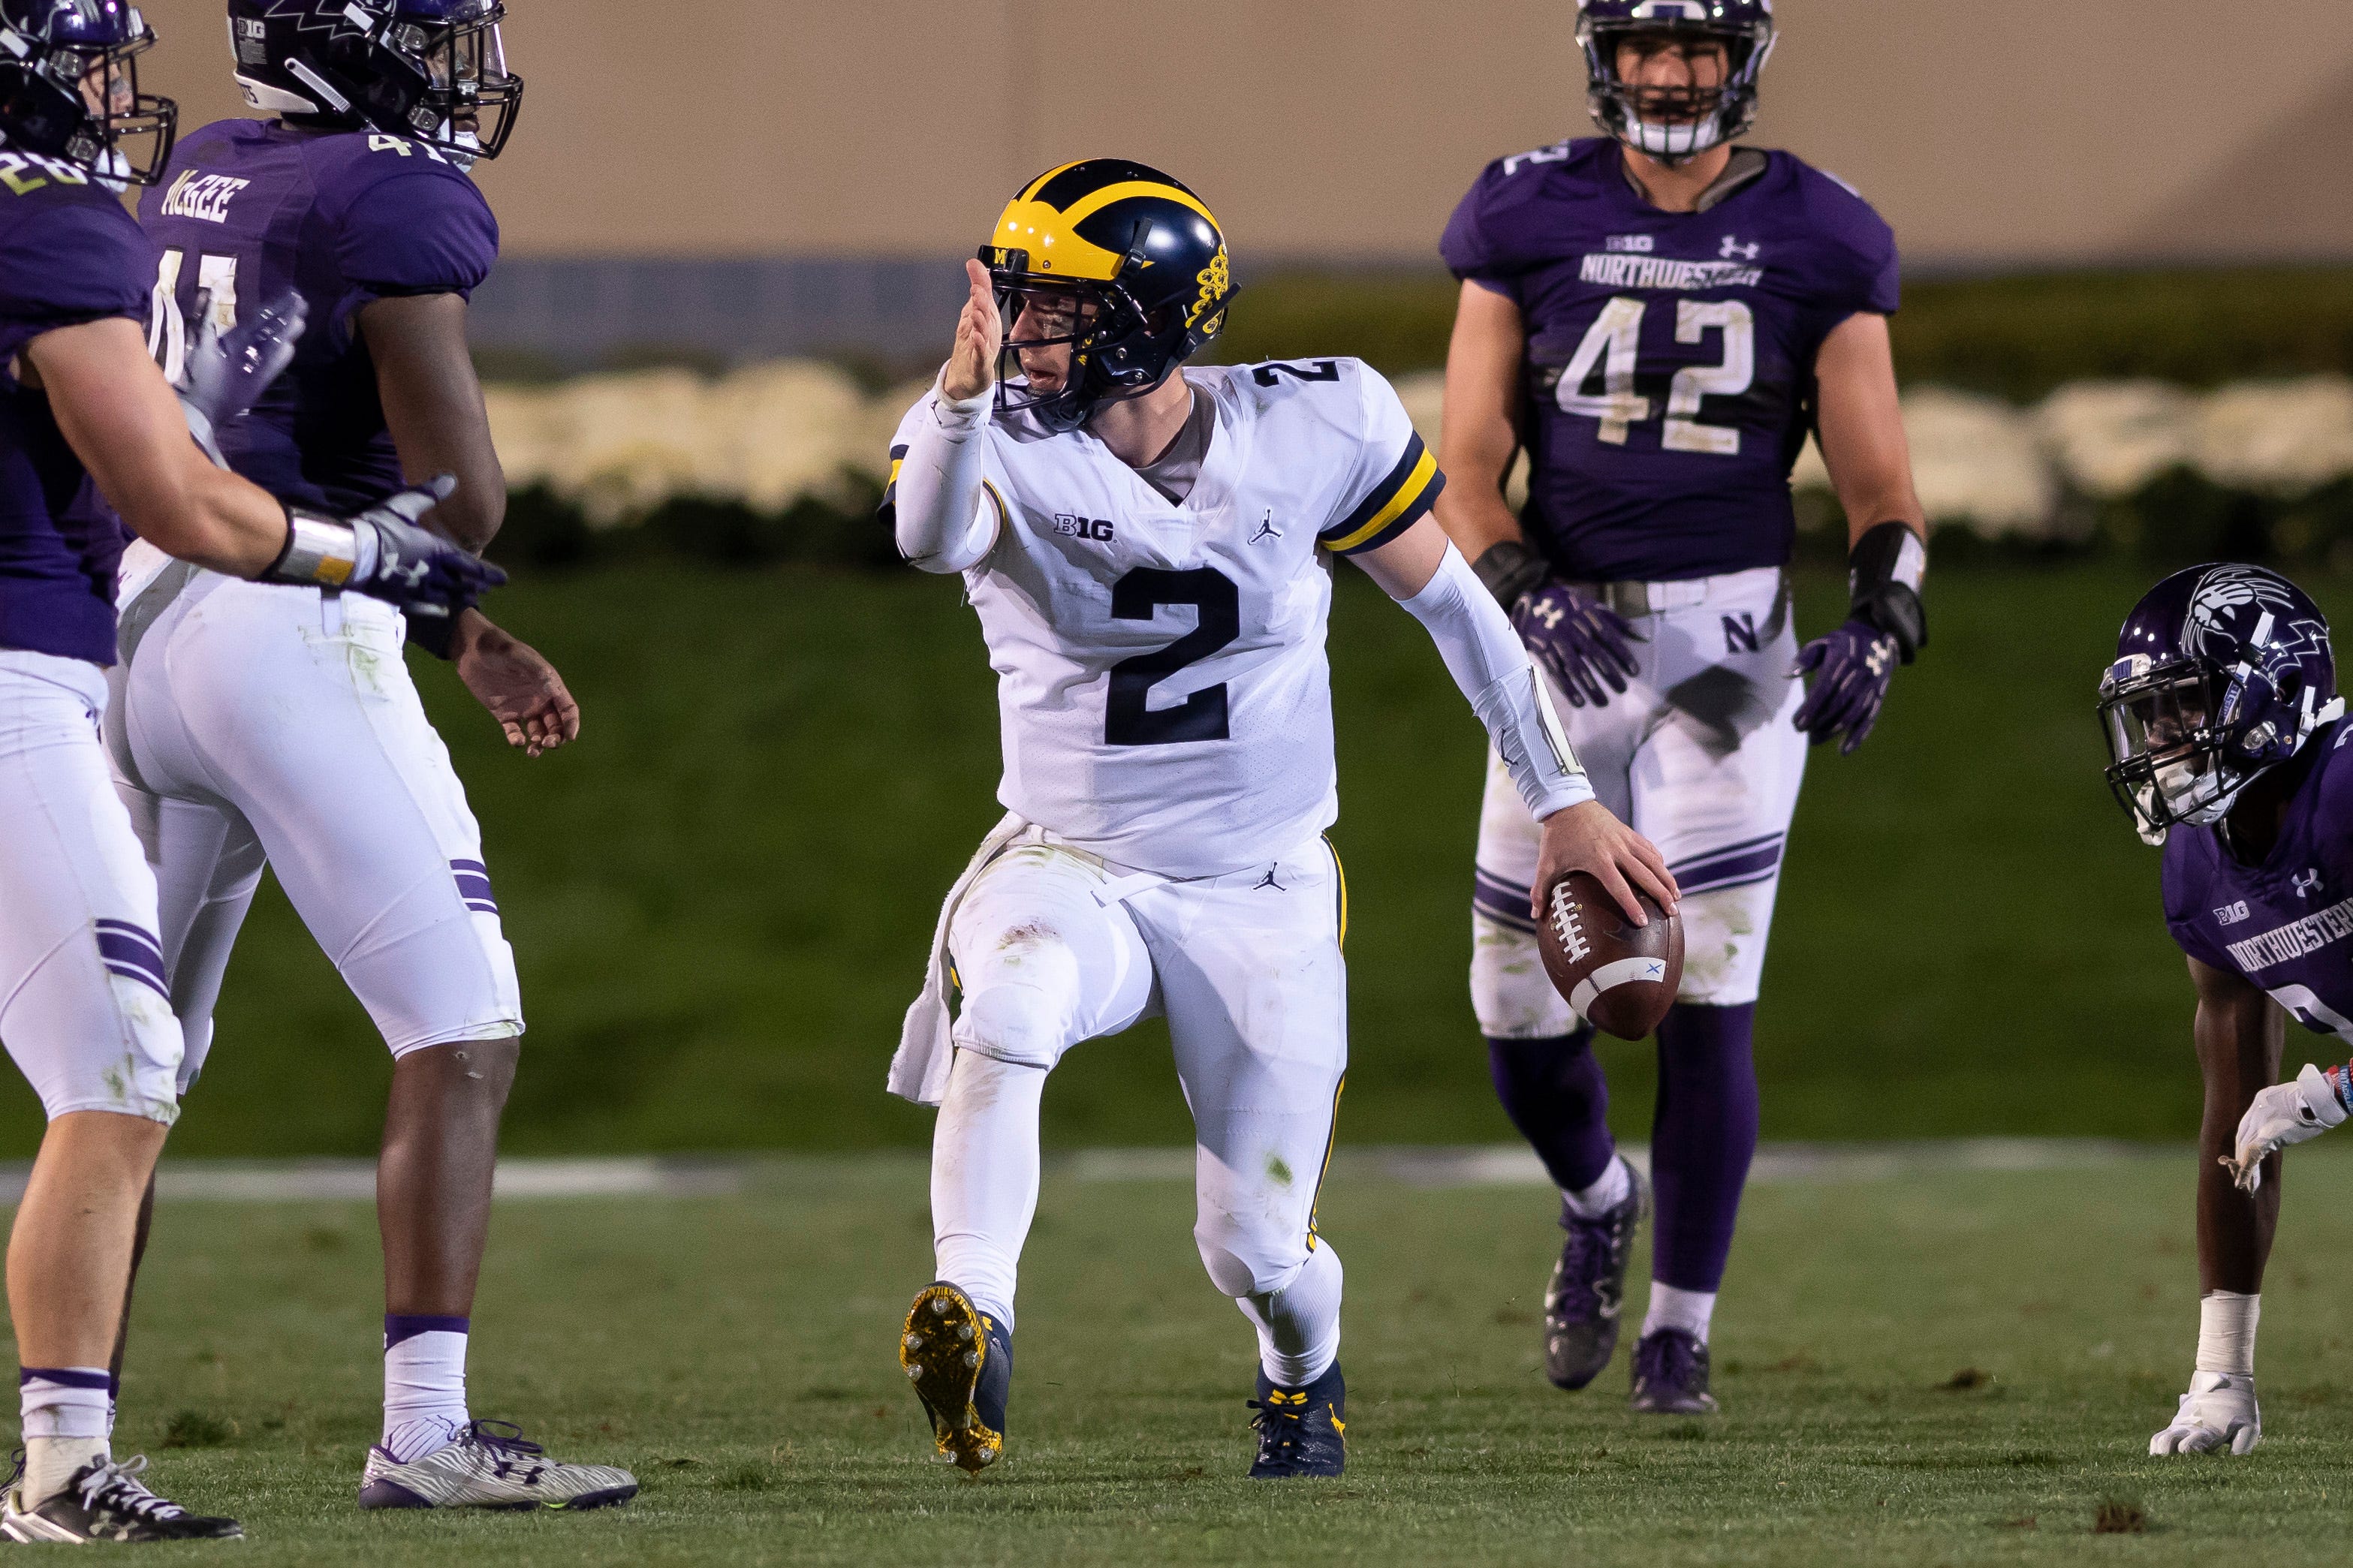 Michigan quarterback Shea Patterson signals after running for a first down in the fourth quarter against Northwestern.